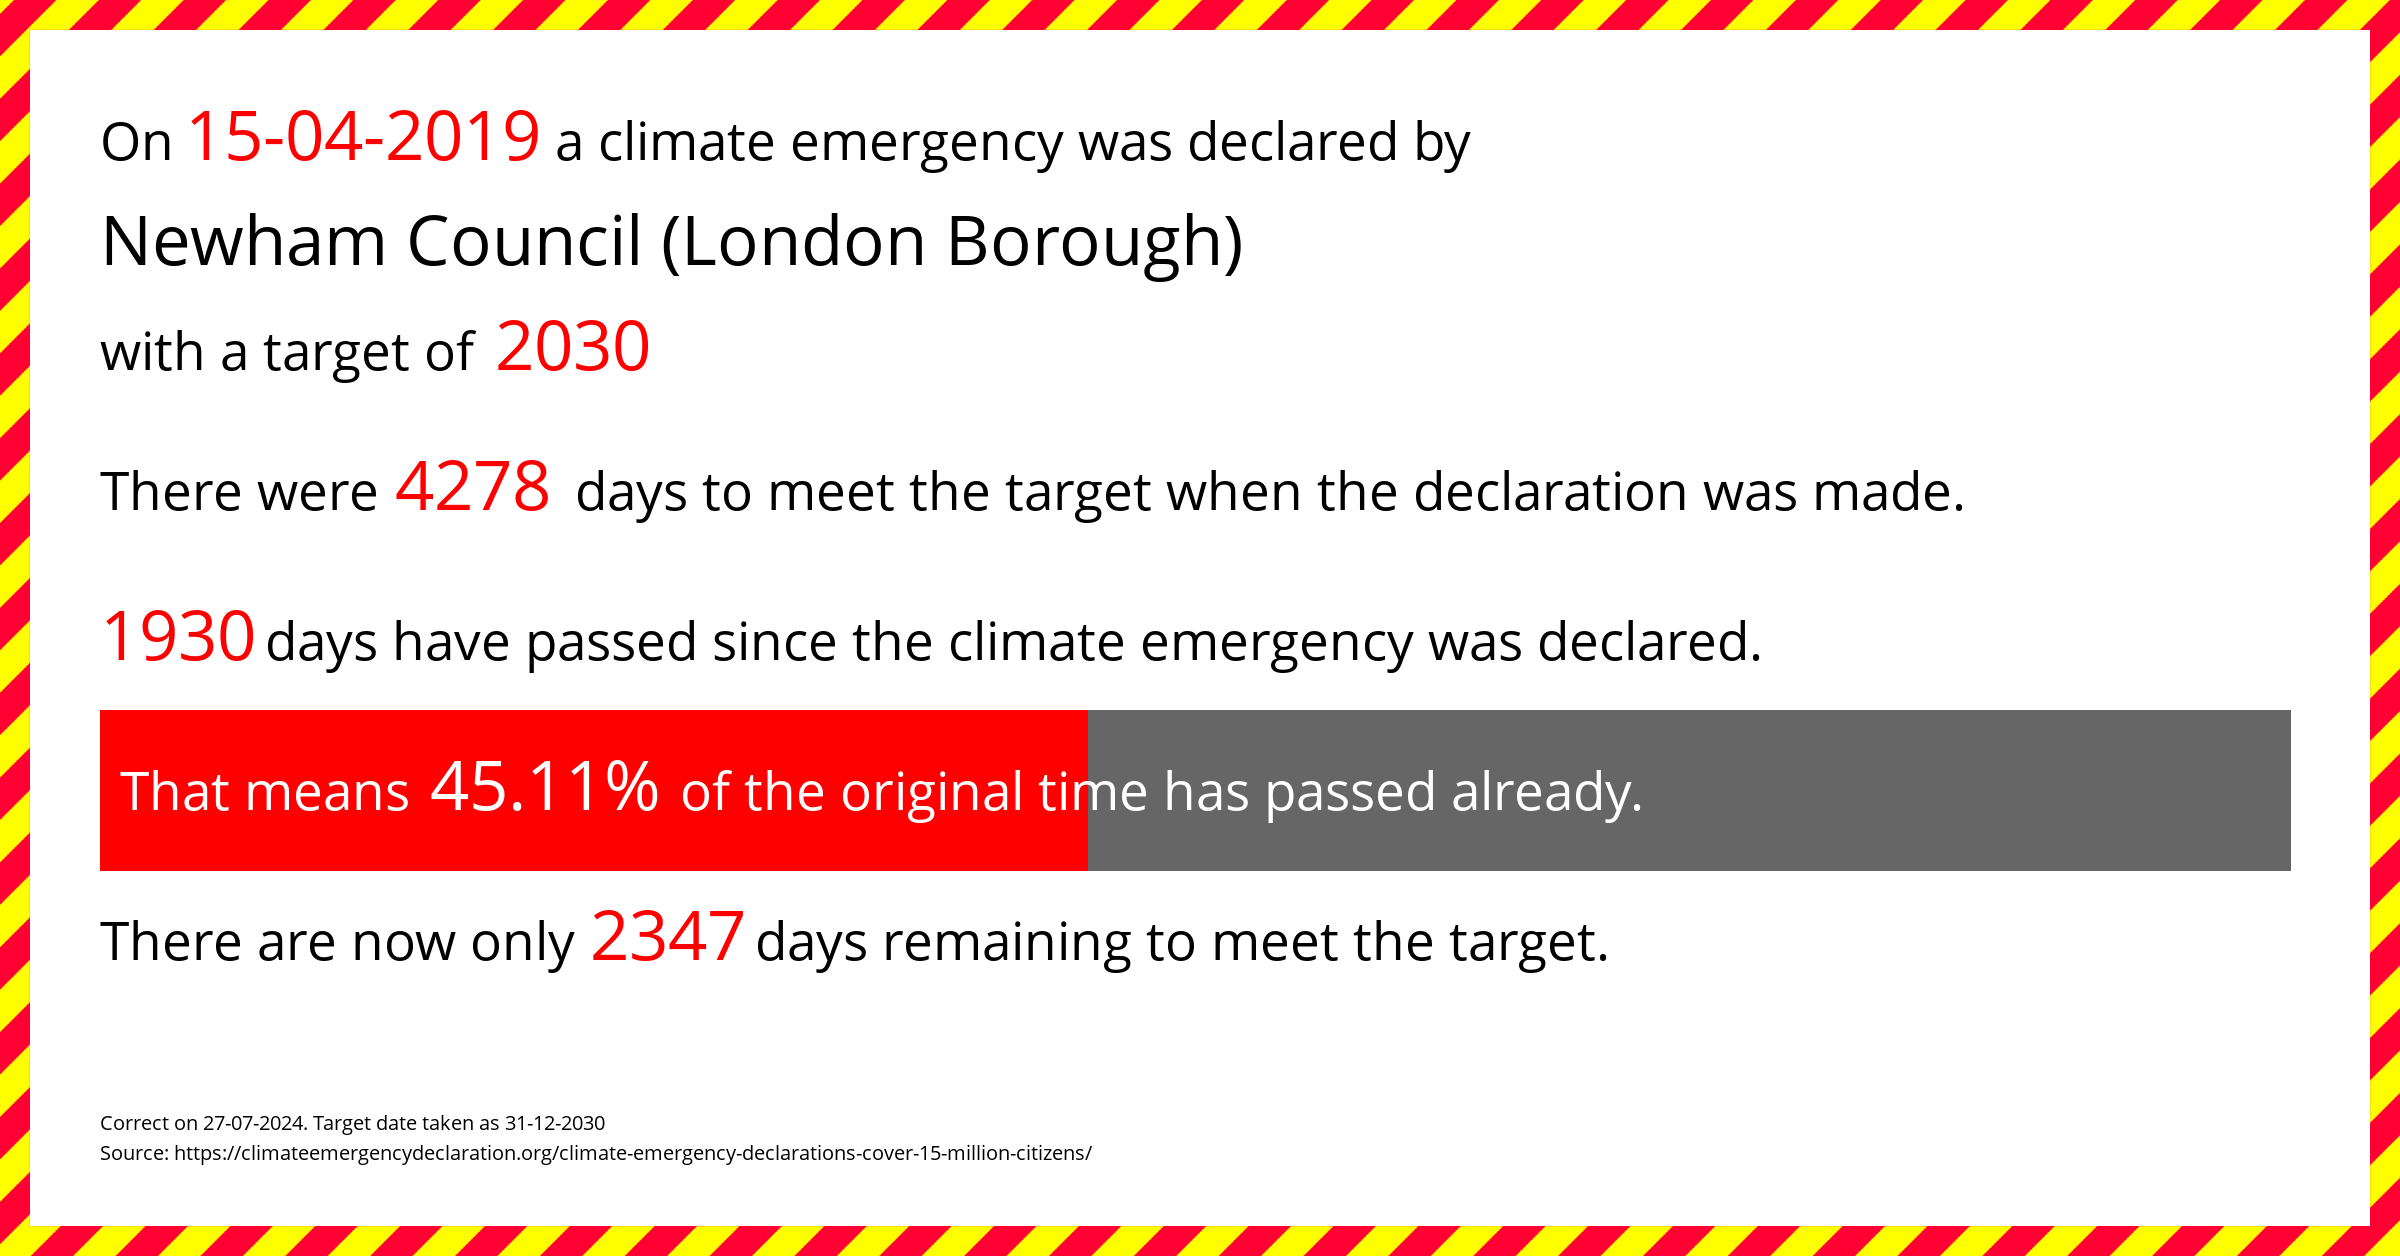 Newham Council (London Borough) declared a Climate emergency on Monday 15th April 2019, with a target of 2030.